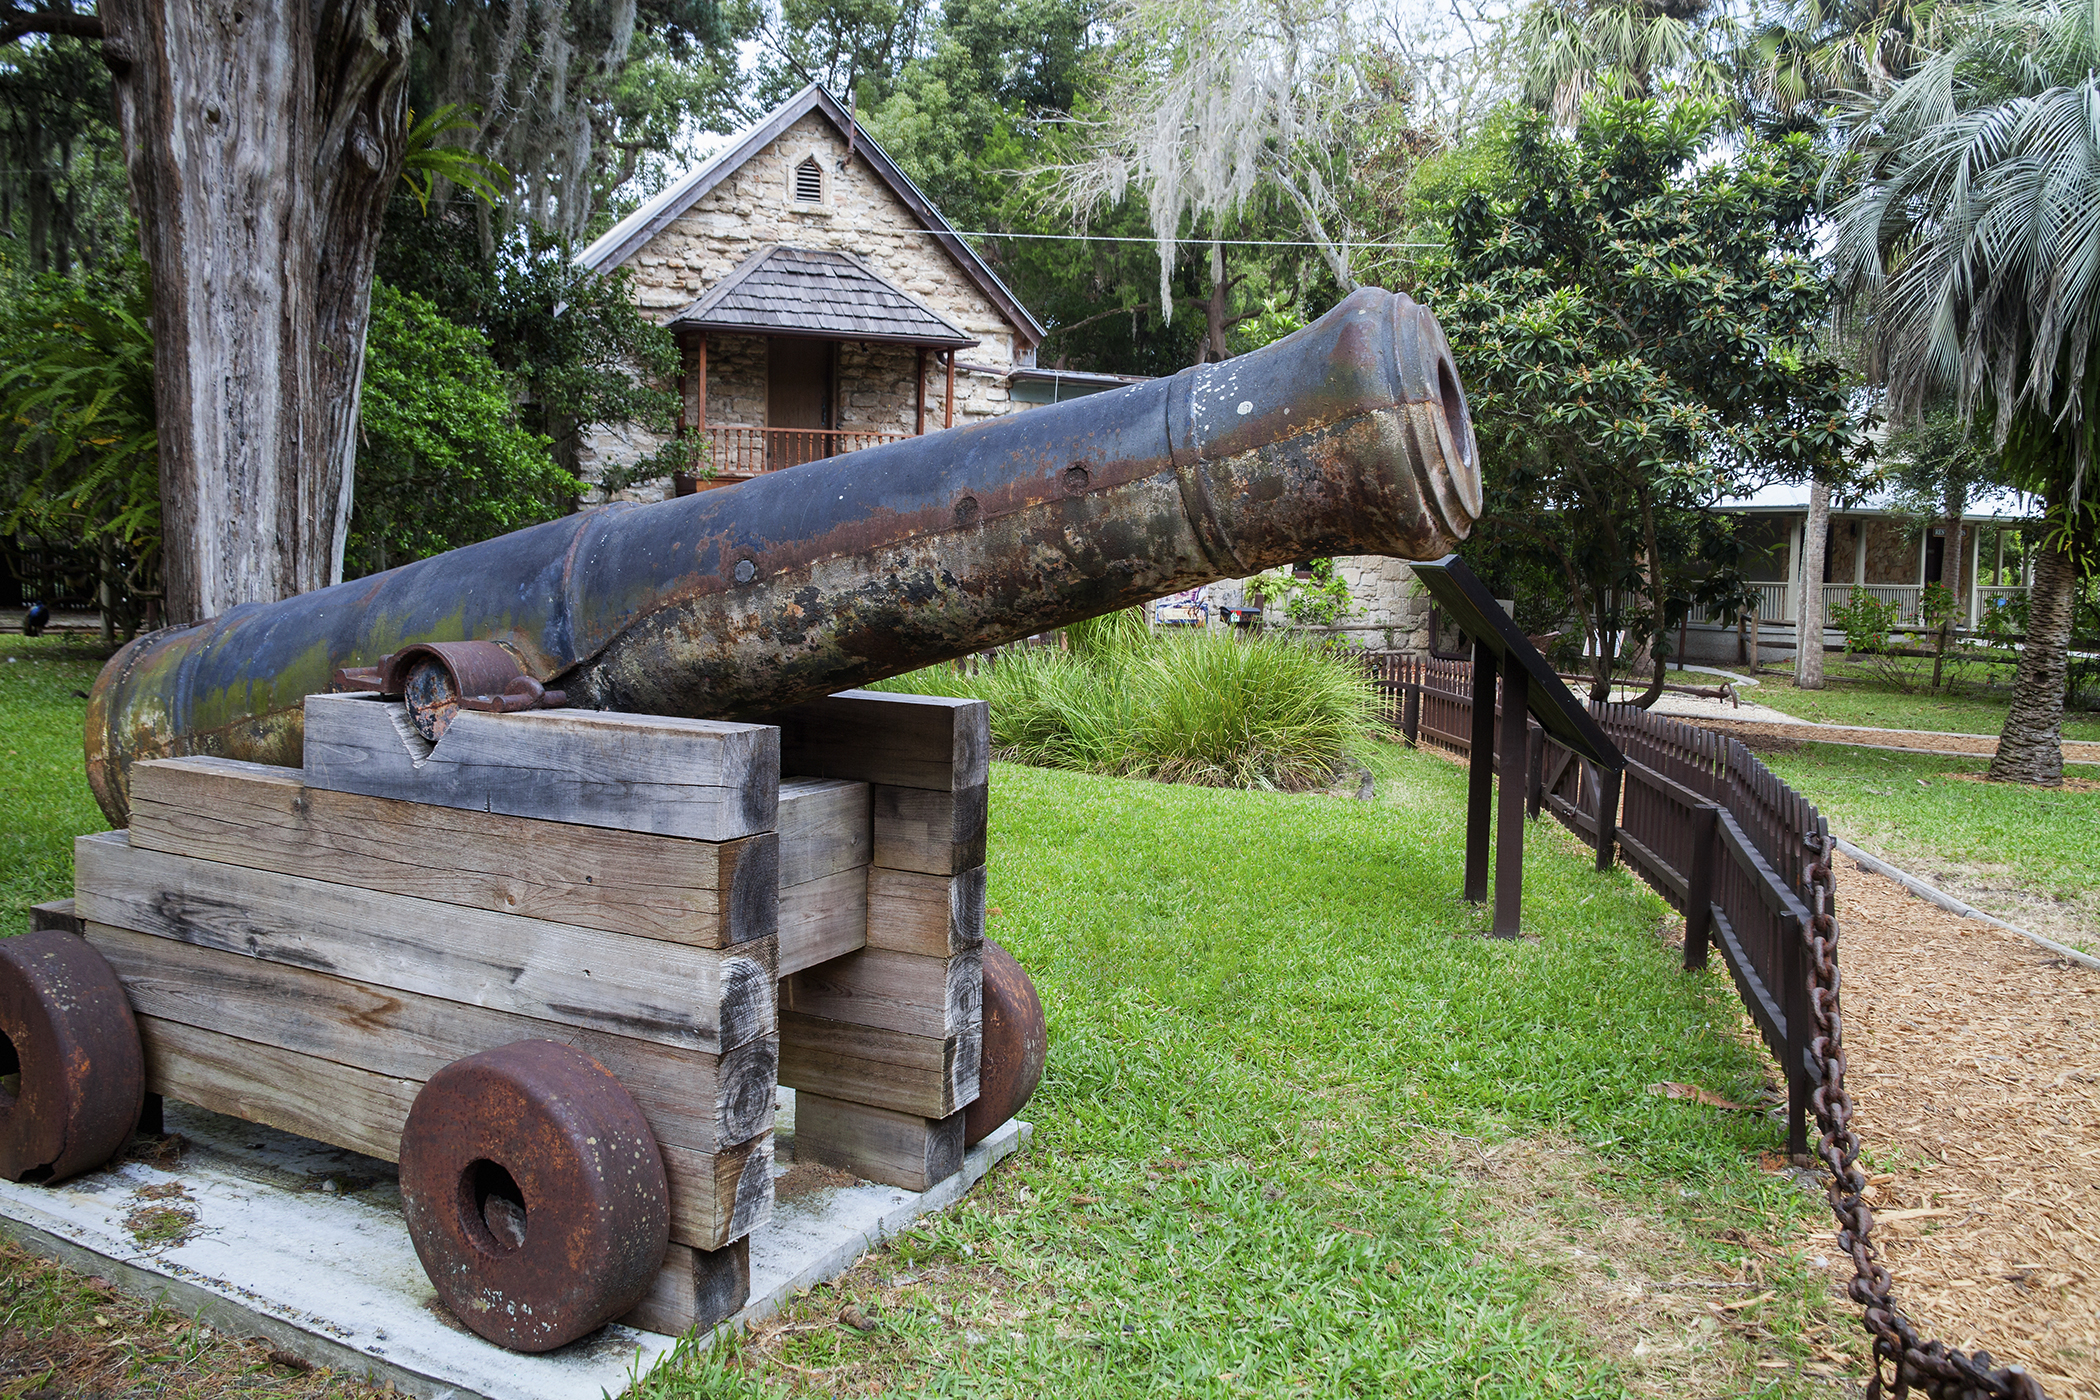 A replica of a cannon from the USS Constitution (Old Ironsides) at the Fountain of Youth. Ponce de Leon's Fountain of Youth Archaeological Park, St. Augustine Florida is in the area first explored by Juan Ponce de Leon in 1513 and later settled by Pedro Menendez de Aviles in 1565. At the Park, you can drink from the fountain which Ponce de Leon thought was the fountain of youth. St. Augustine is the oldest European settlement in the United States.